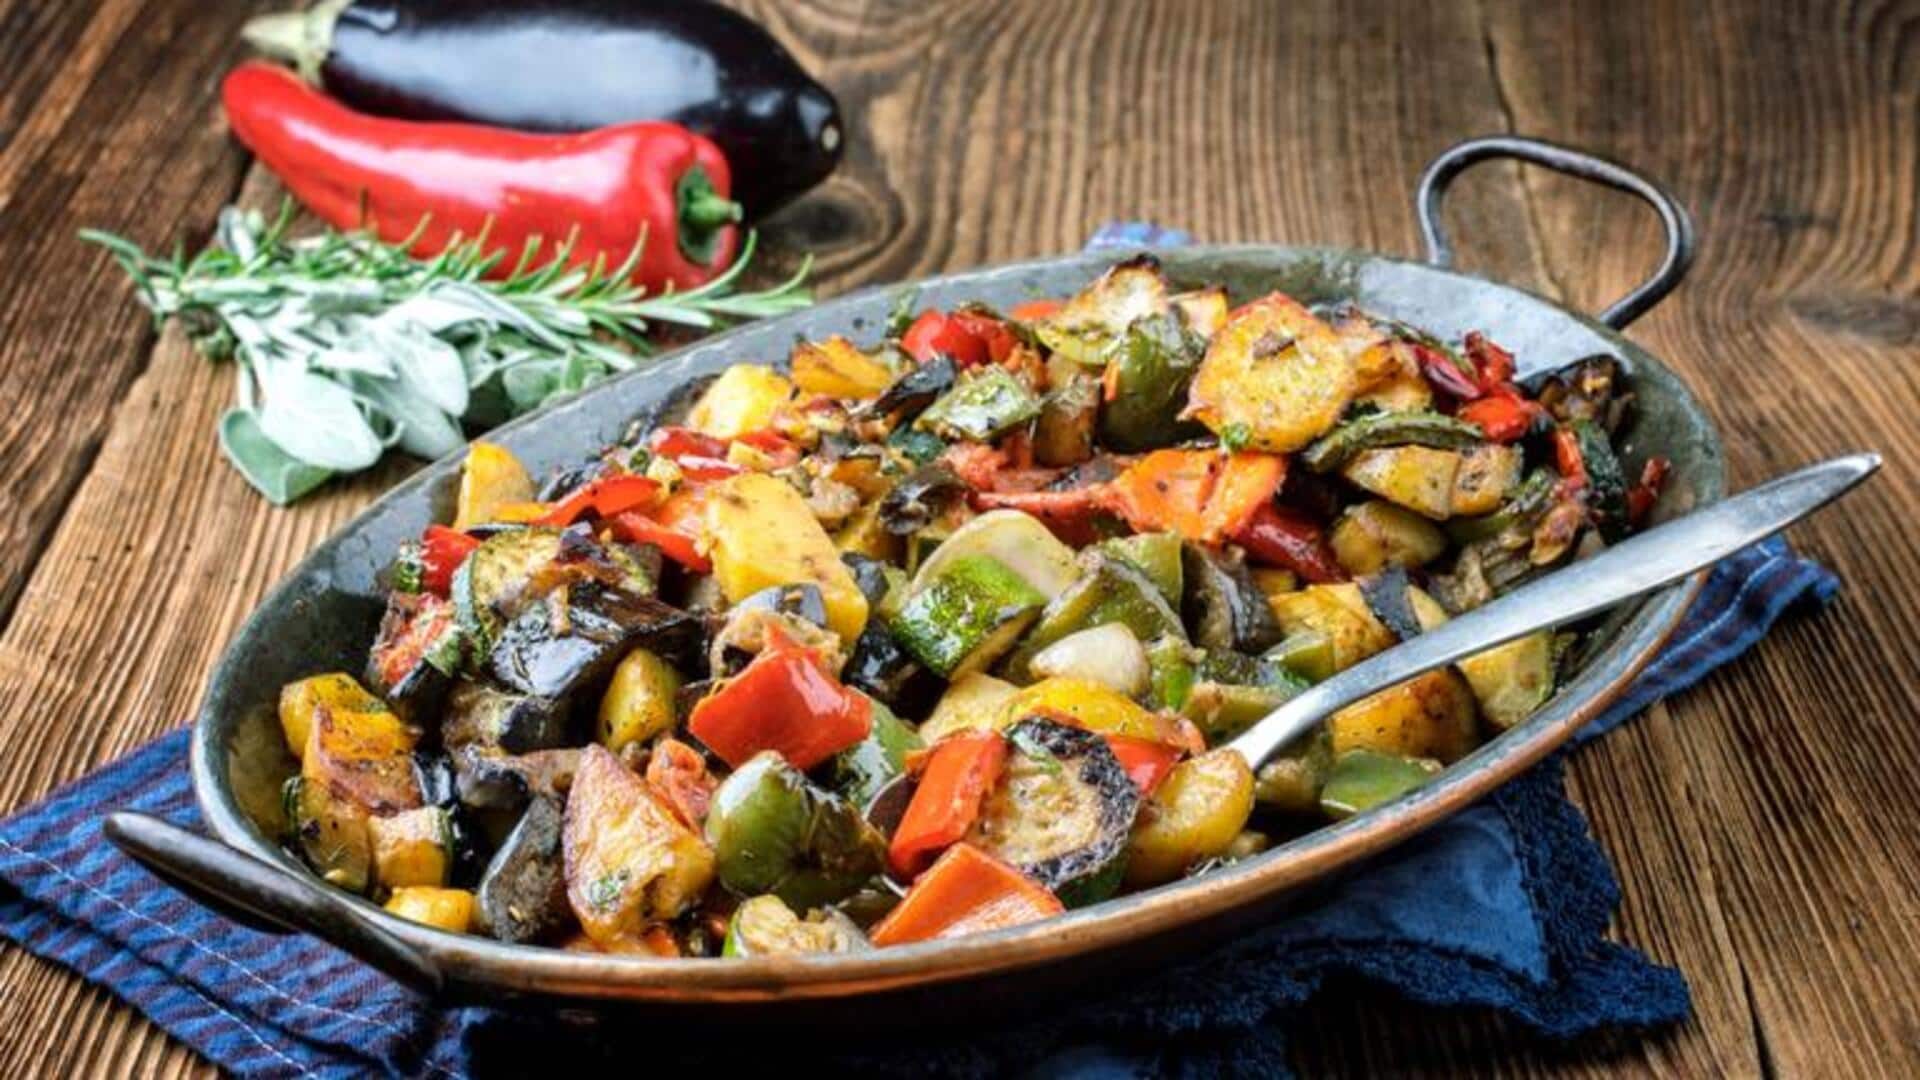 Recipe-o'-clock: Cook Ratatouille, a French dish made with stewed veggies